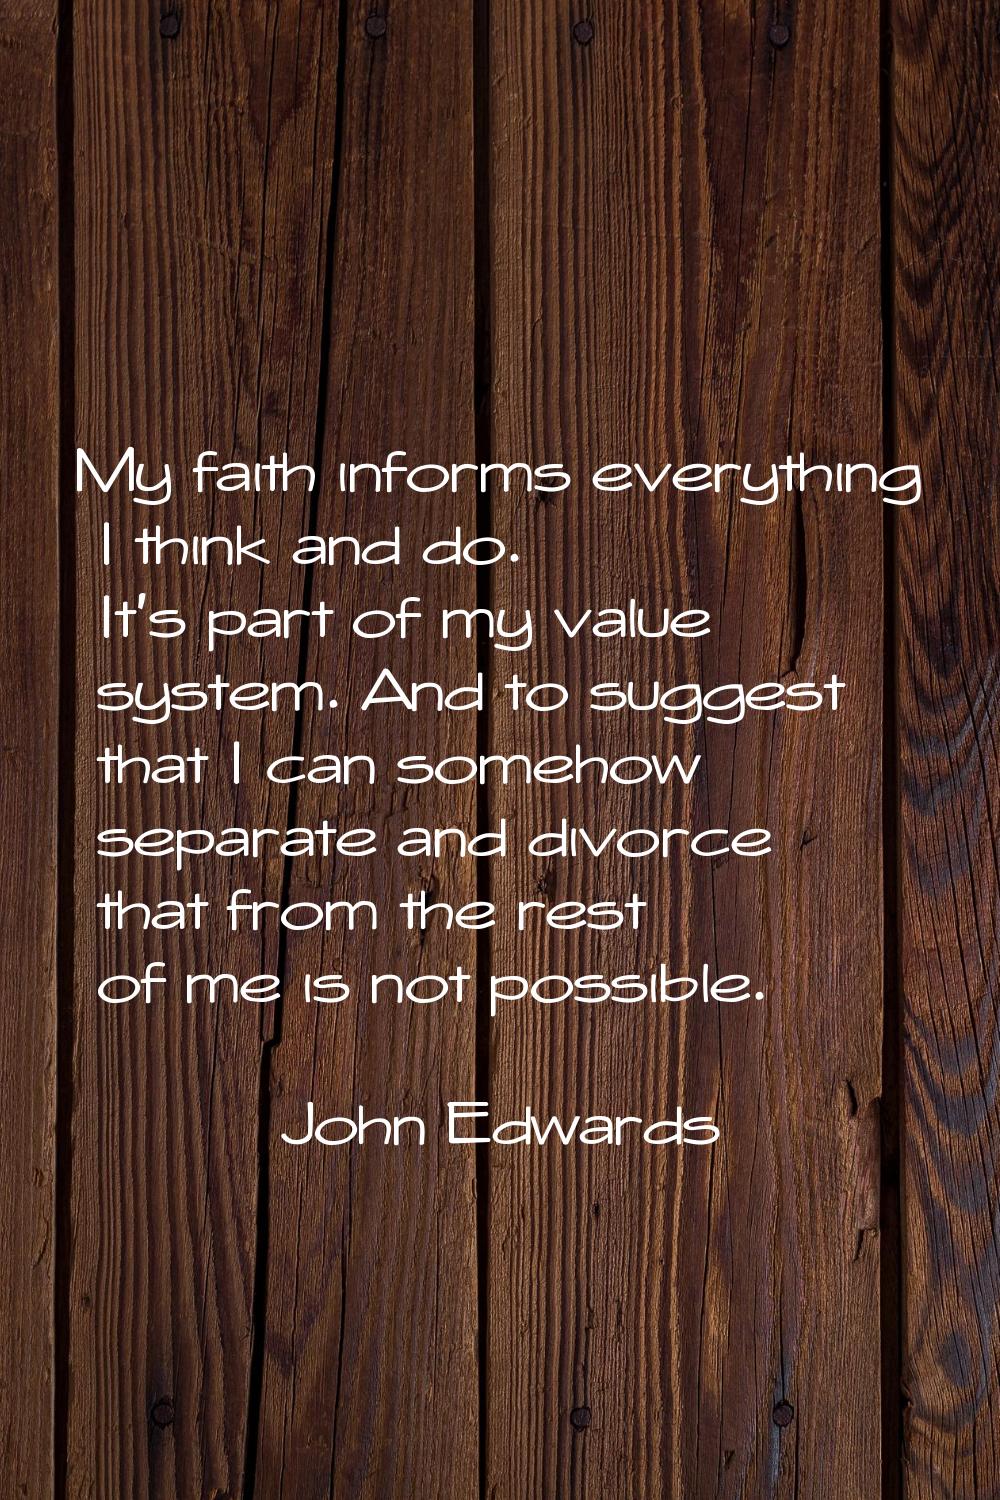 My faith informs everything I think and do. It's part of my value system. And to suggest that I can